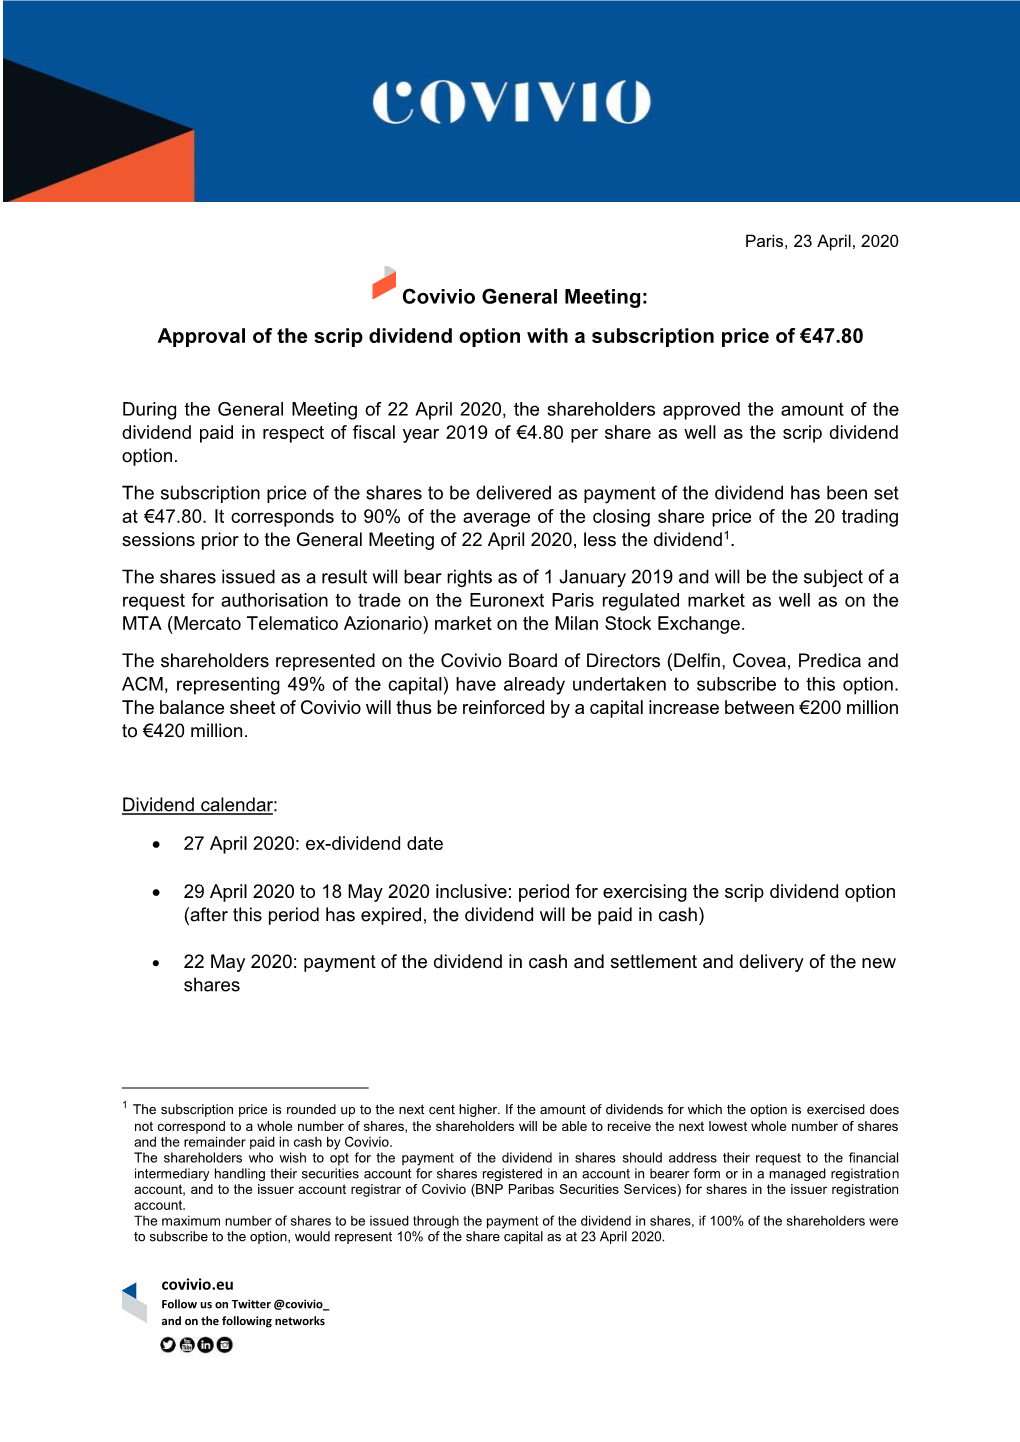 Covivio General Meeting: Approval of the Scrip Dividend